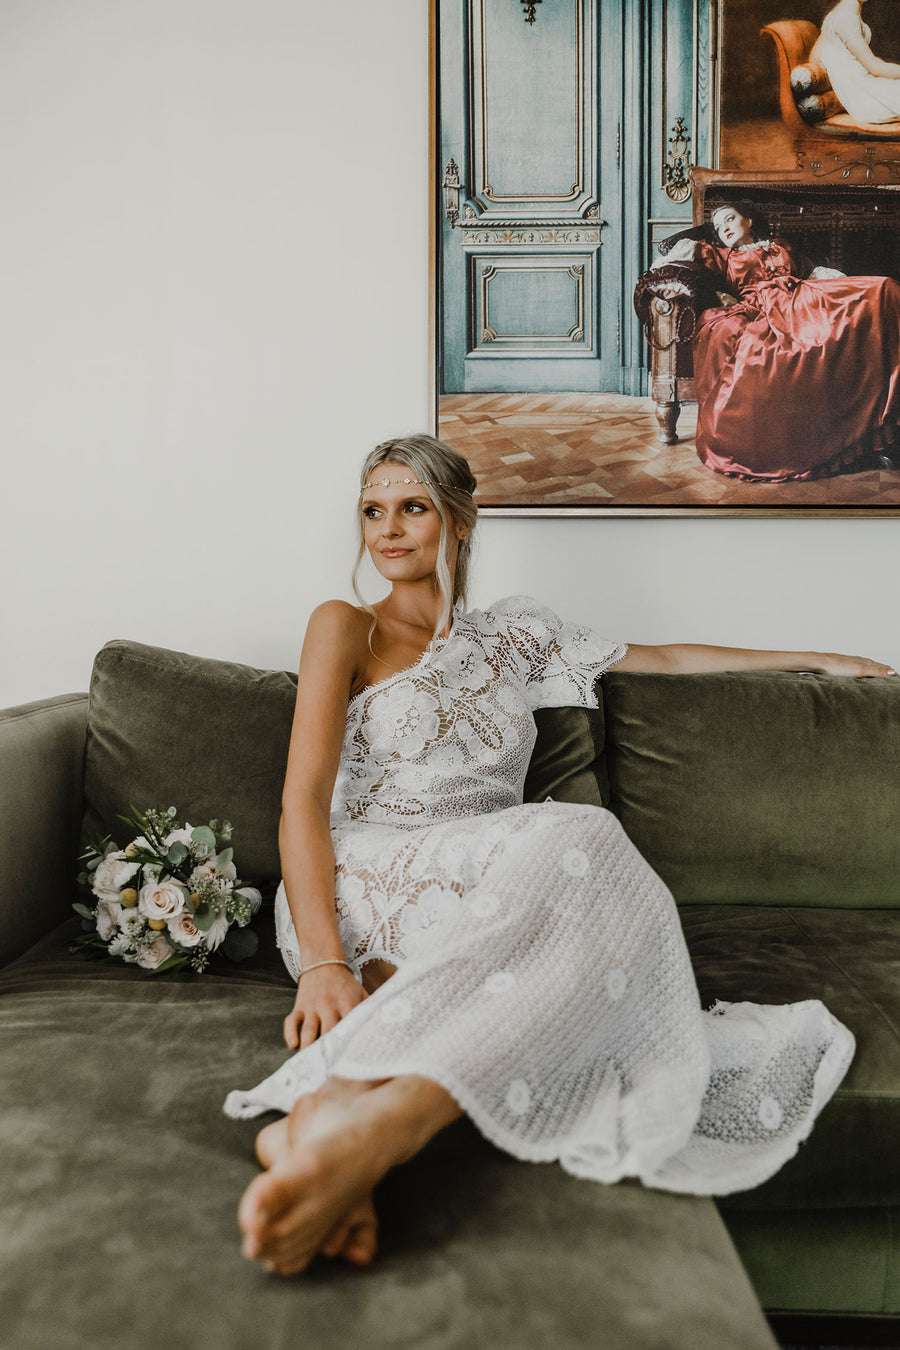 This is a photo of a woman wearing a floor length, one shoulder, maxi lace dress. There is a scalloped leg slit on the same side as the strapless top part of dress. The dress is lined to the leg slit. She sits on an olive green couch and is looking off into the distance.